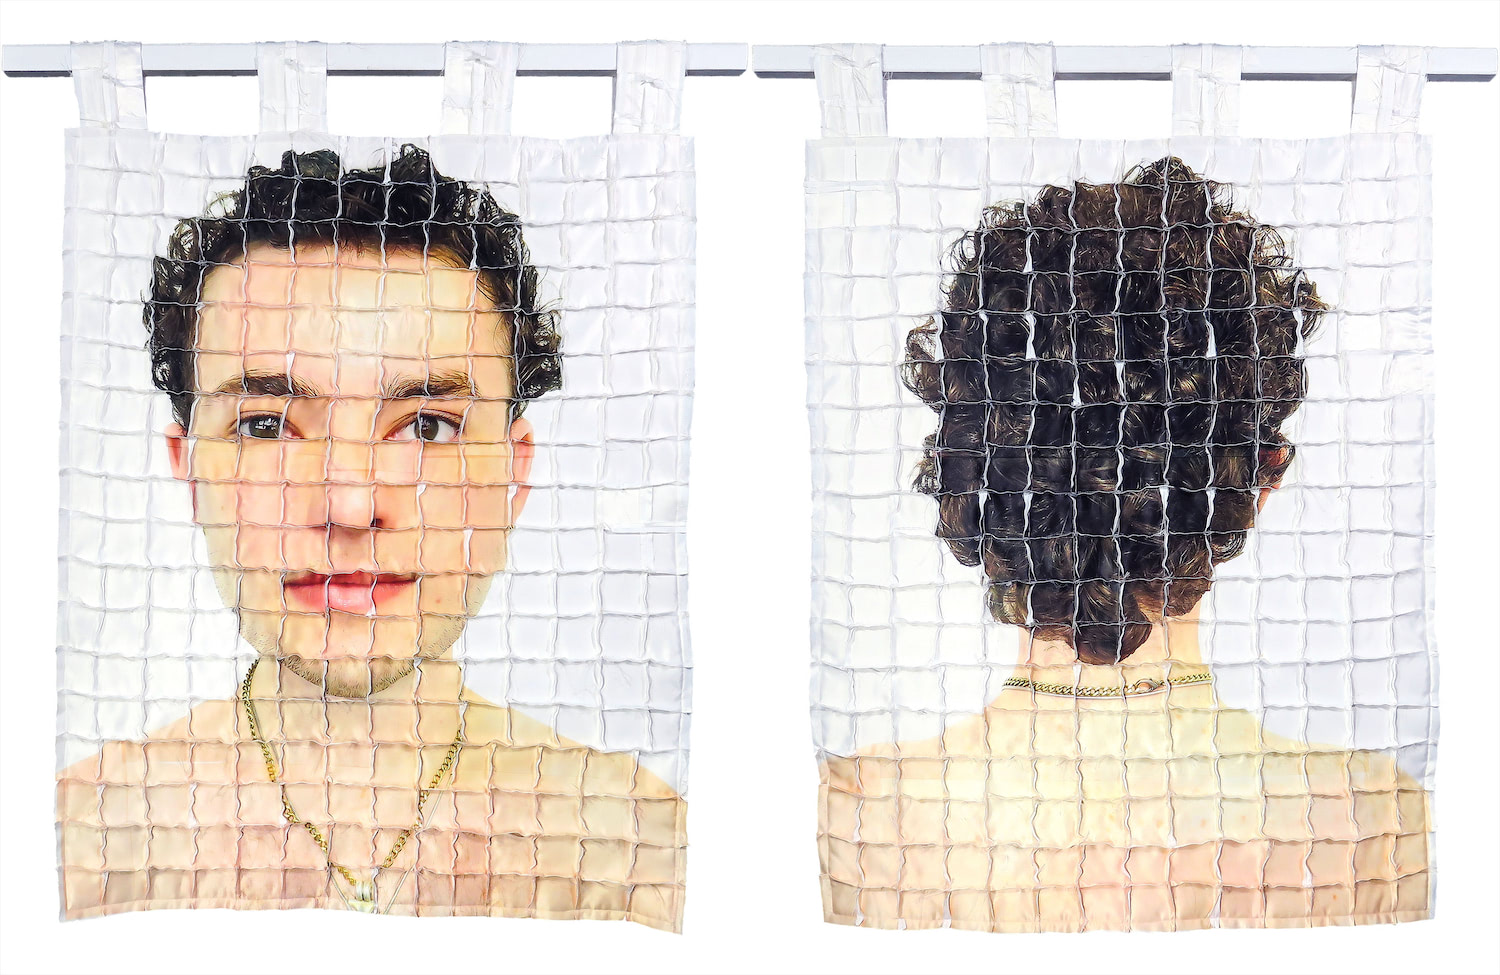 Left: Front side of quilt #1 with the artist's face distorted by a gridded system of seams that are sticking out. Right: Back side of quilt #1 with the back of the artist's head and shoulders distorted by a gridded system of seams that are sticking out.